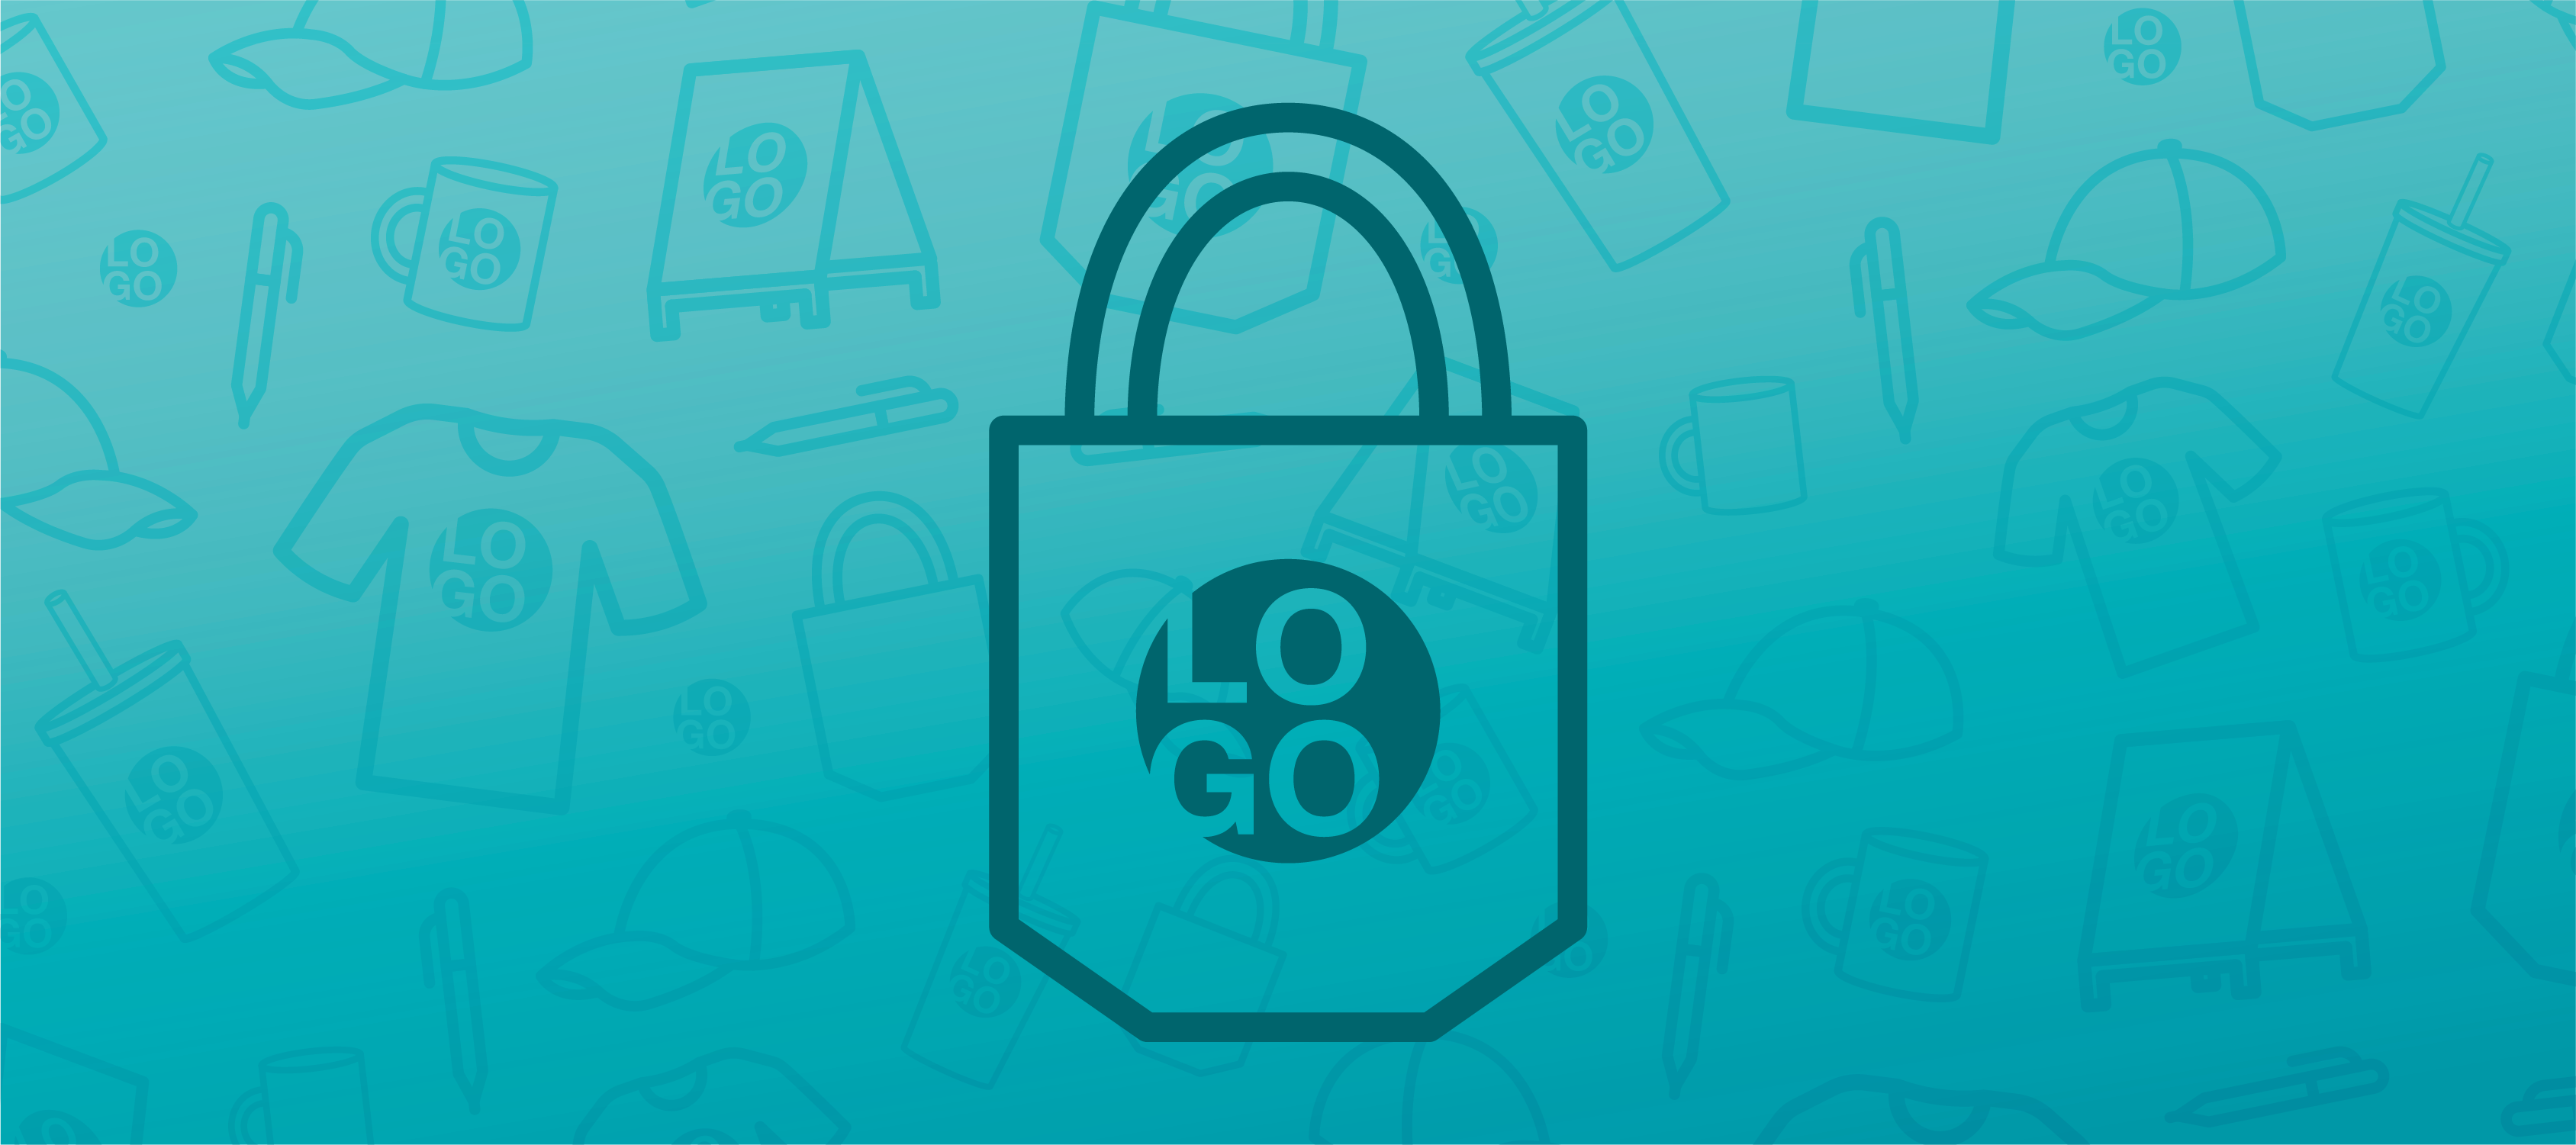 A blue header image featuring an icon of a branded tote bag in the center and faded promo product icons in the background